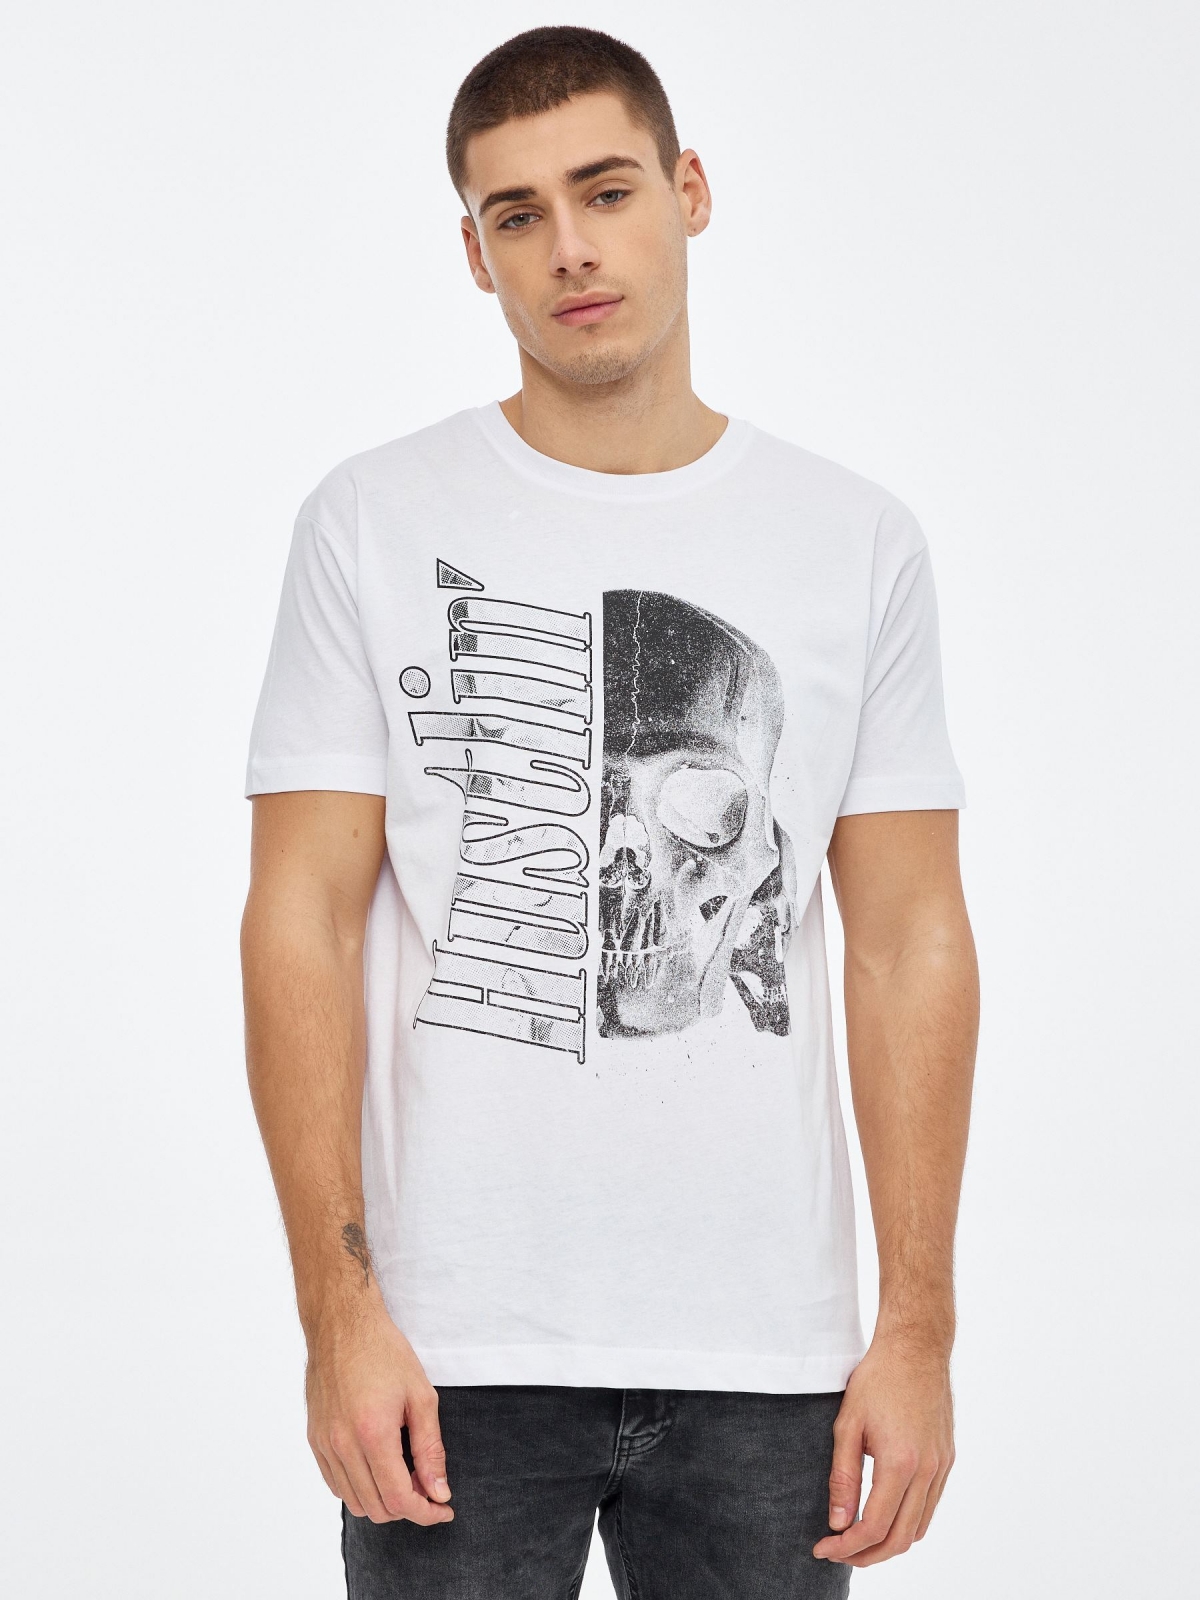 Skull printed t-shirt white middle front view